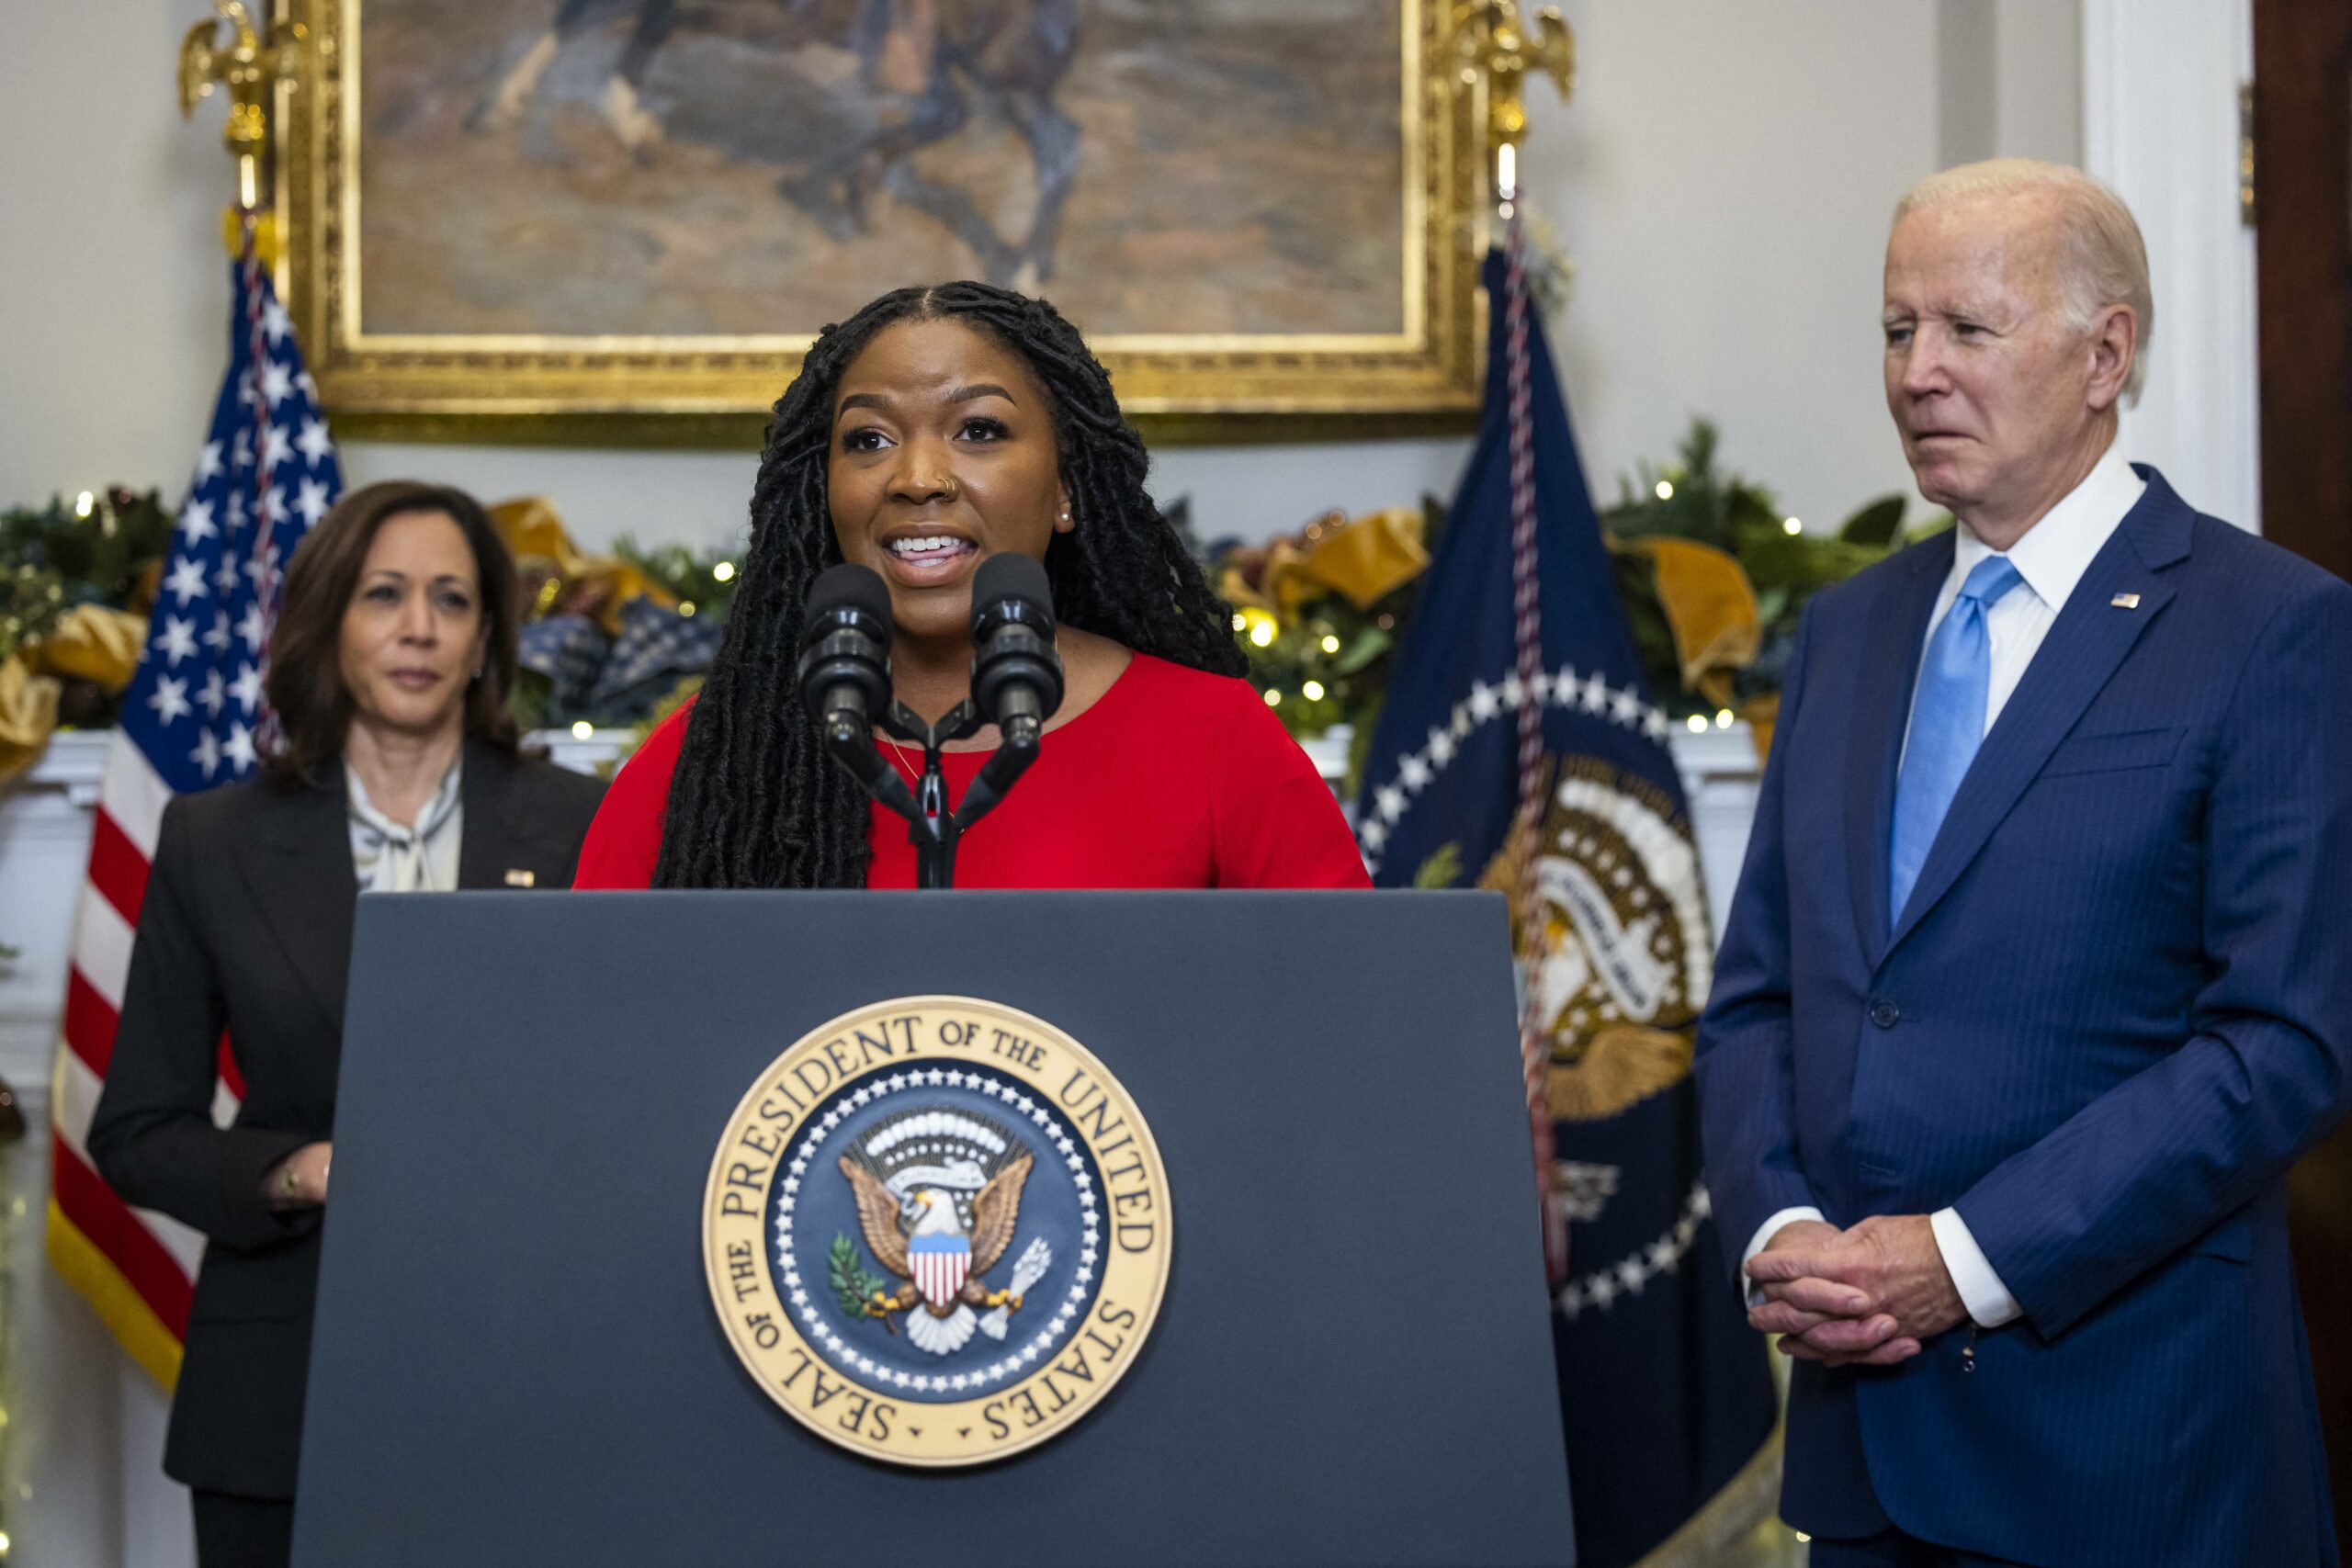 United States President Joe Biden, alongside Cherelle Griner, prepares to announce a prisoner exchange with Russia from the Roosevelt Room of the White House in Washington, DC, USA, 08 December 2022.United States President Joe Biden, alongside Cherelle Griner, prepares to announce a prisoner exchange with Russia from the Roosevelt Room of the White House in Washington, DC, USA, 08 December 2022.